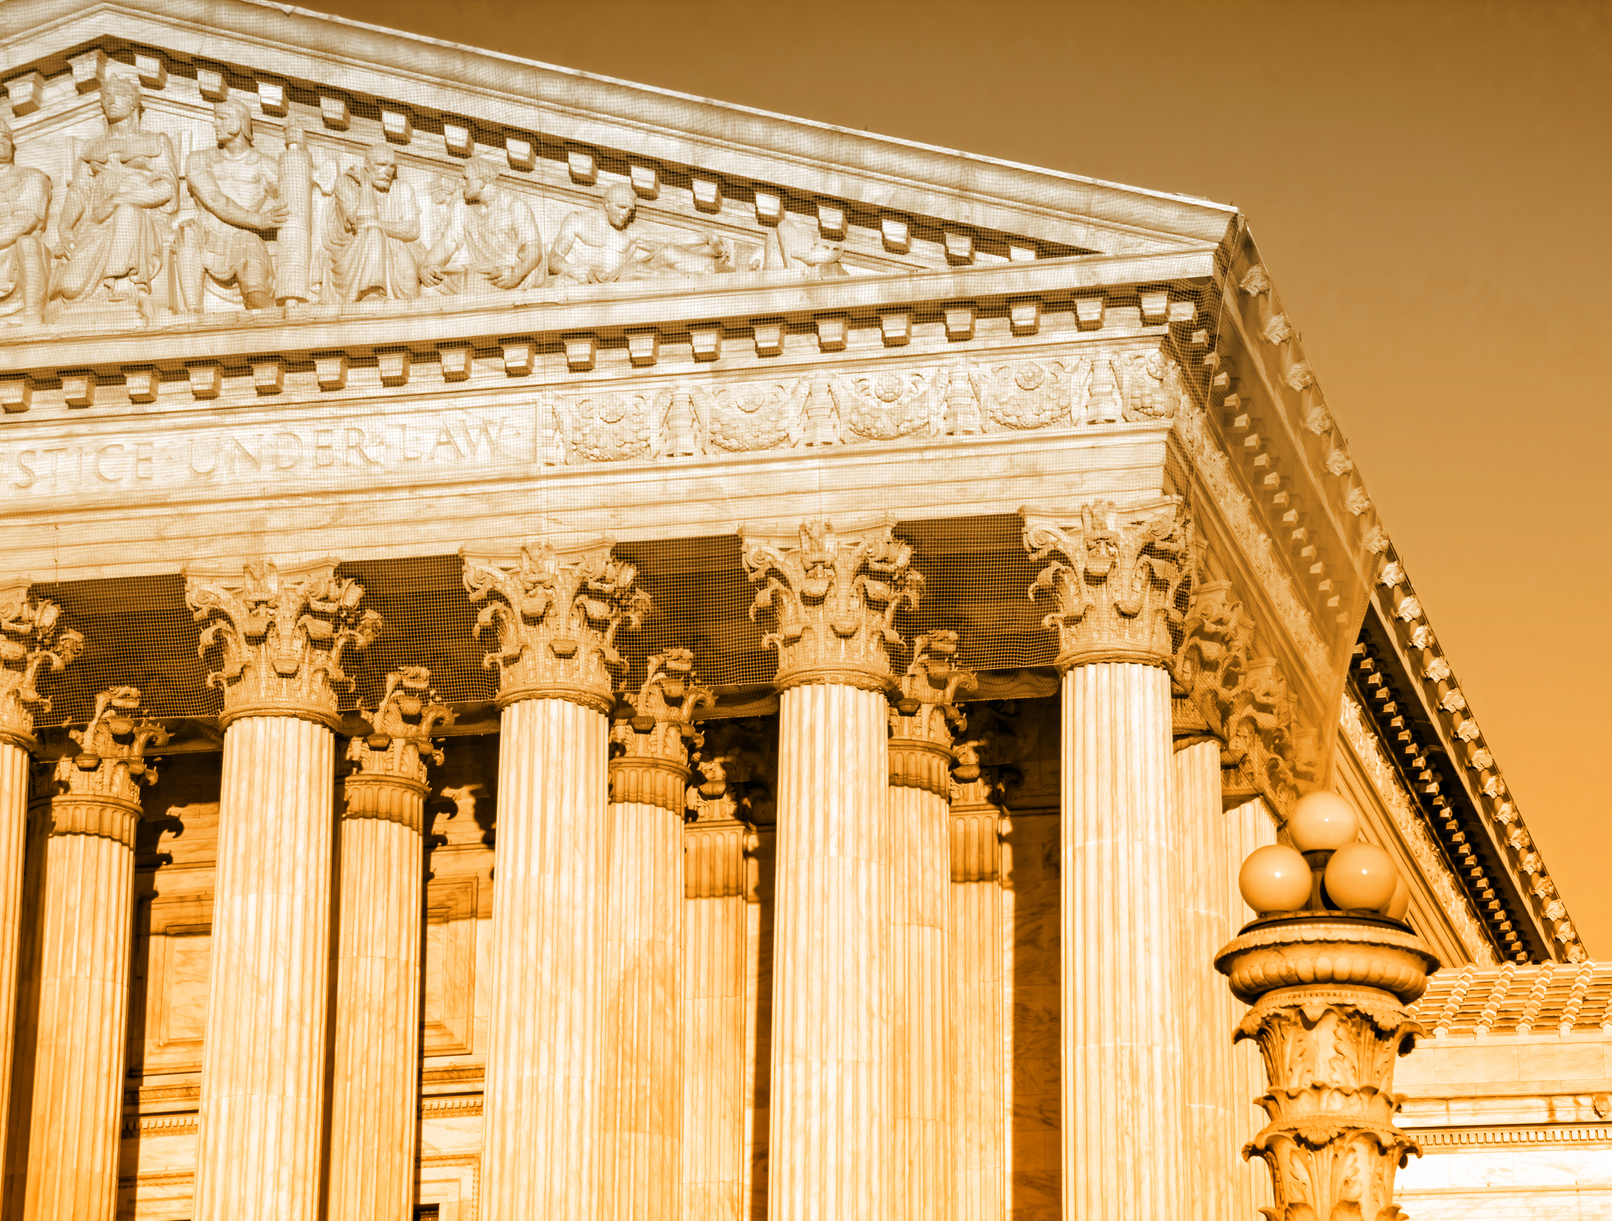 Listen to the Latest Oral Arguments from the United States Supreme Court